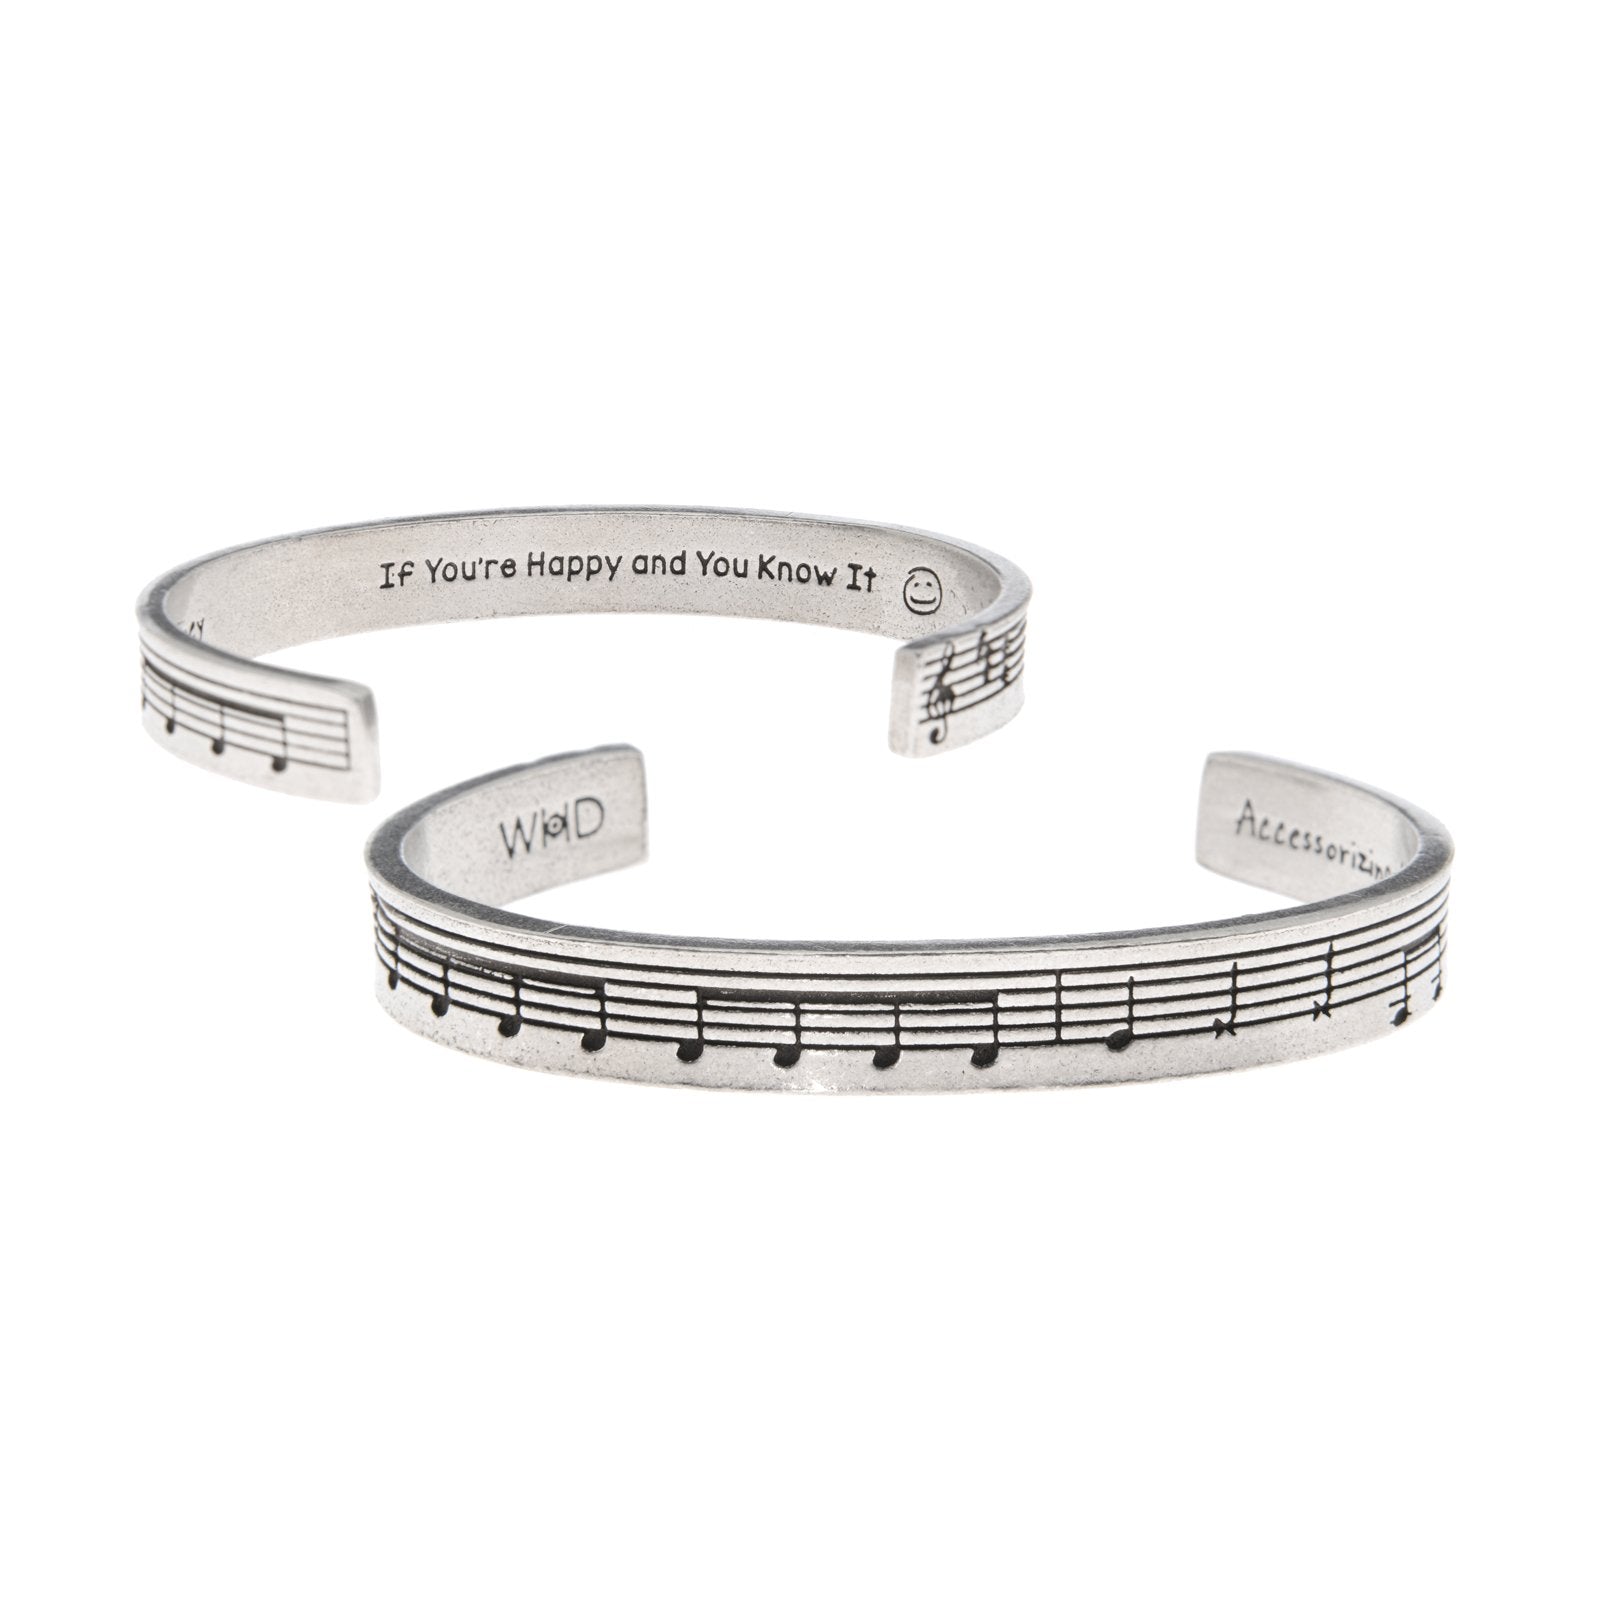 If You're Happy and You Know It Quotable Cuff Bracelet